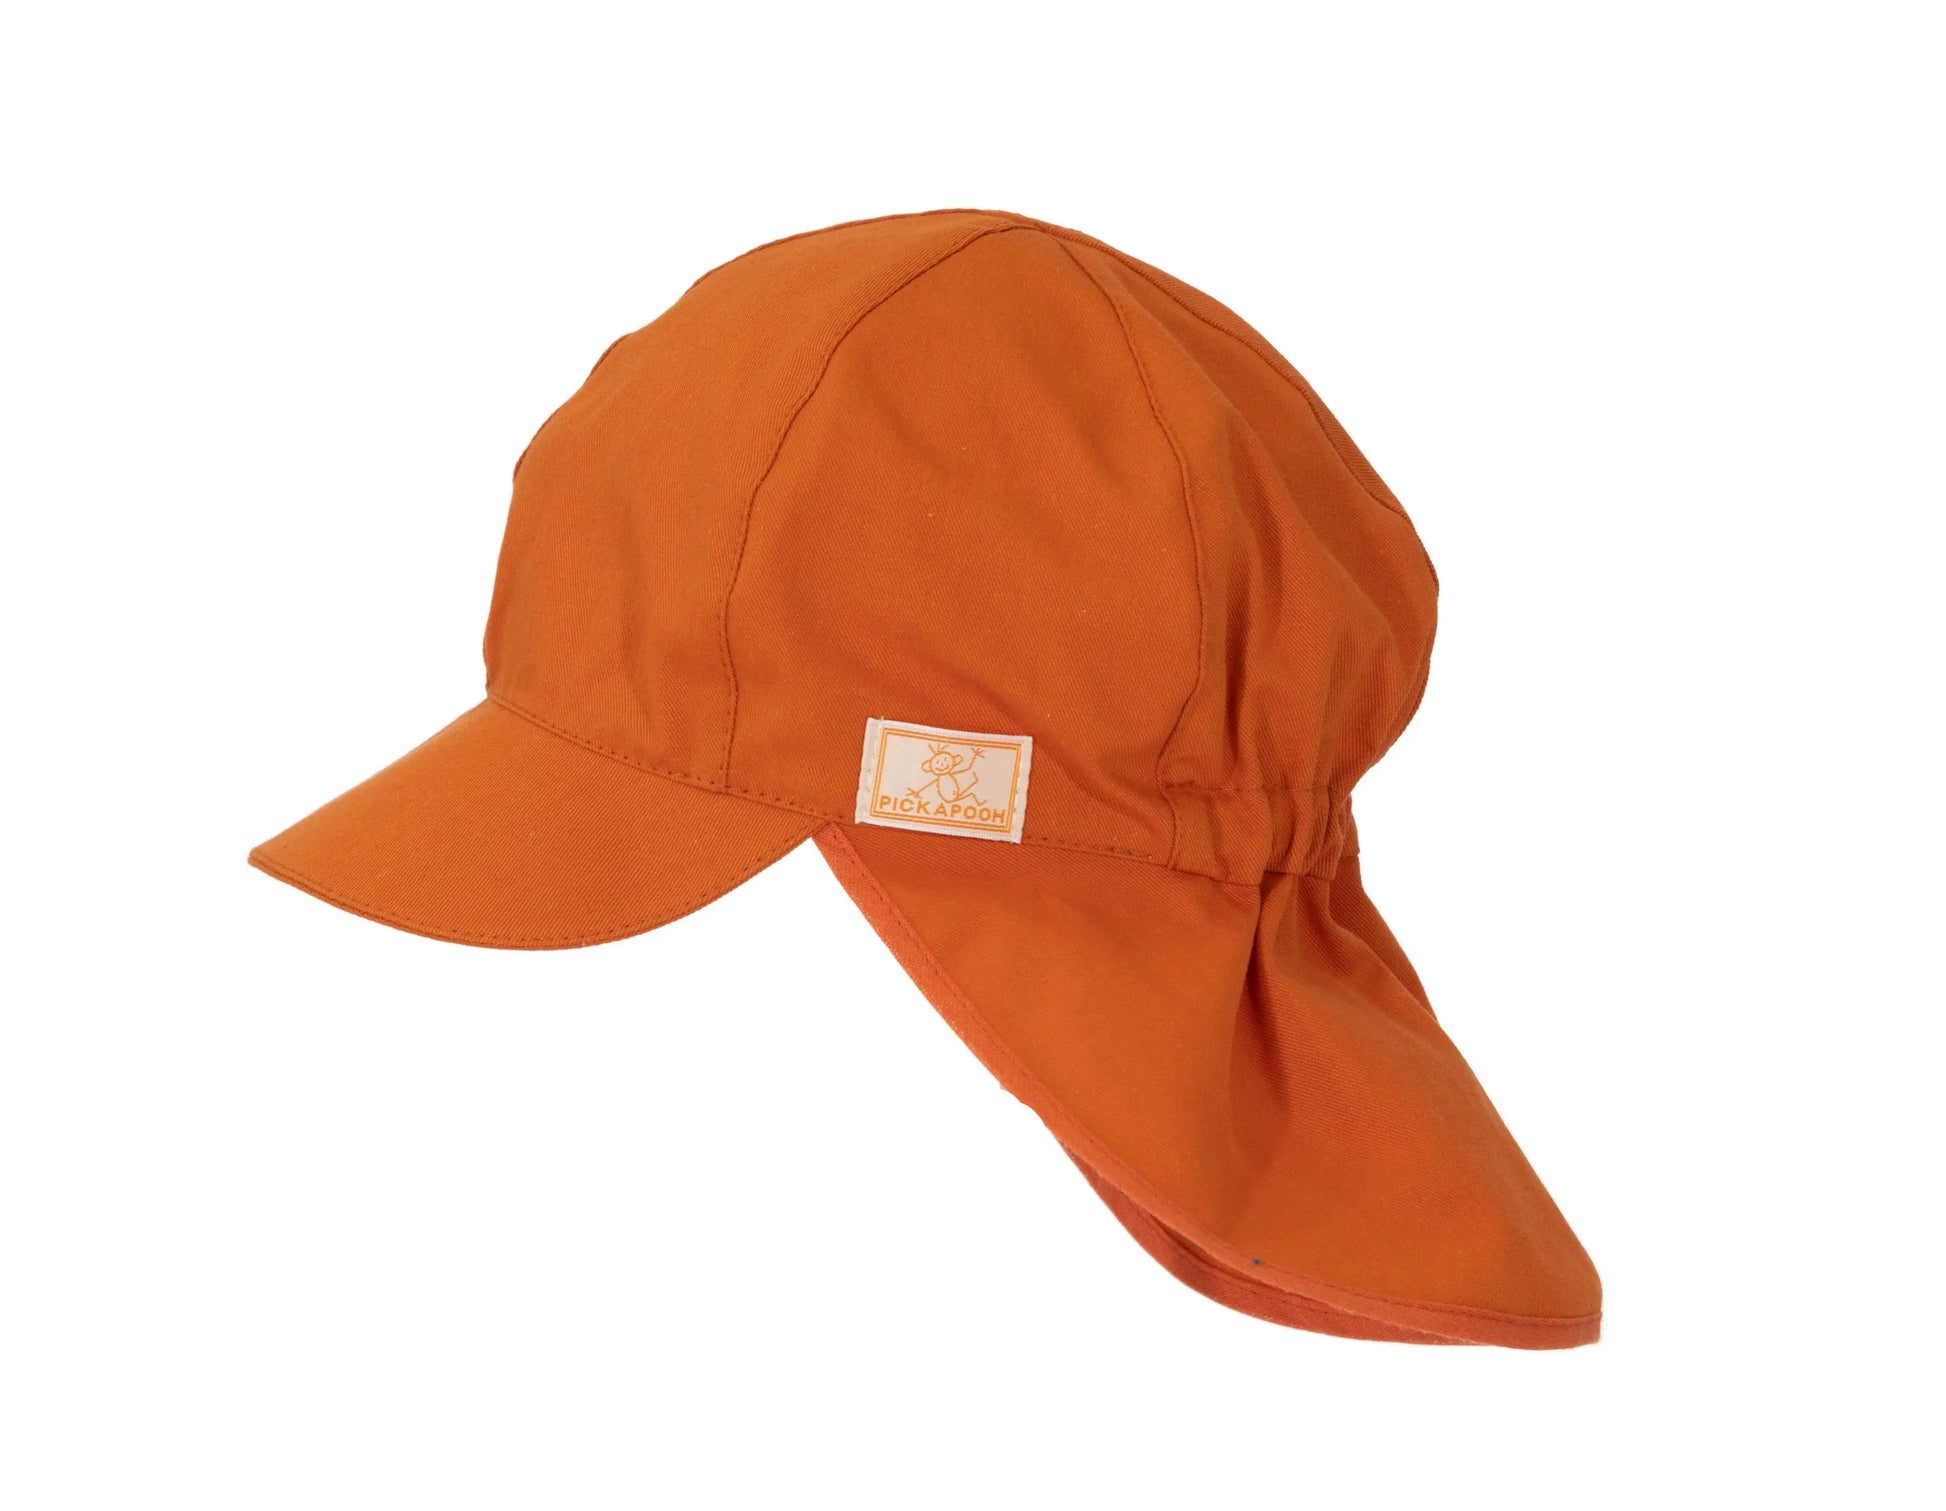 Kids Organic Cotton Sun Hat with UV Protection - Made with love in